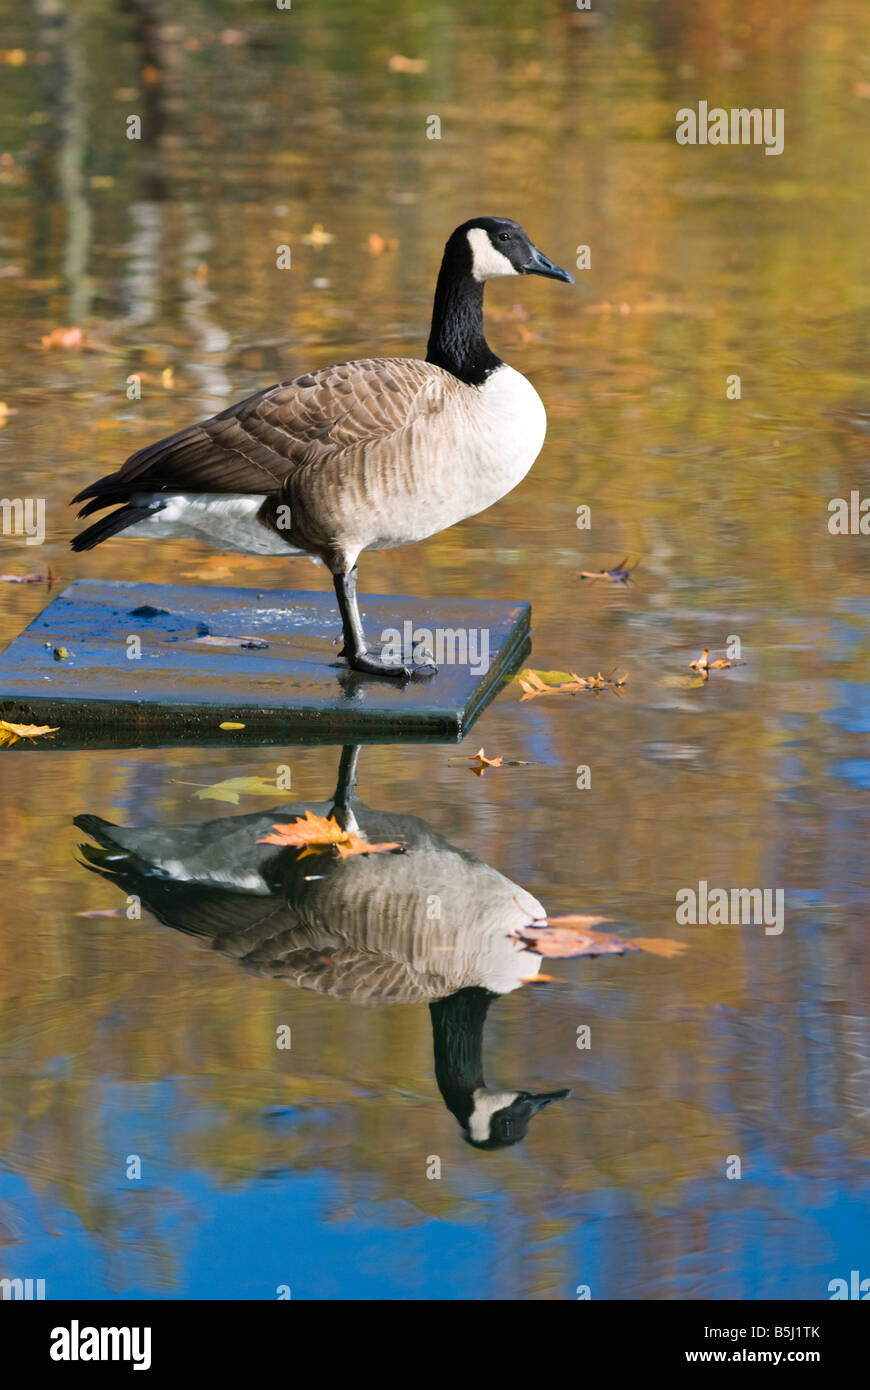 A Canadian Goose and its reflection in the Model Boat Pond at the Conservatory Water in Central Park, New York City Stock Photo